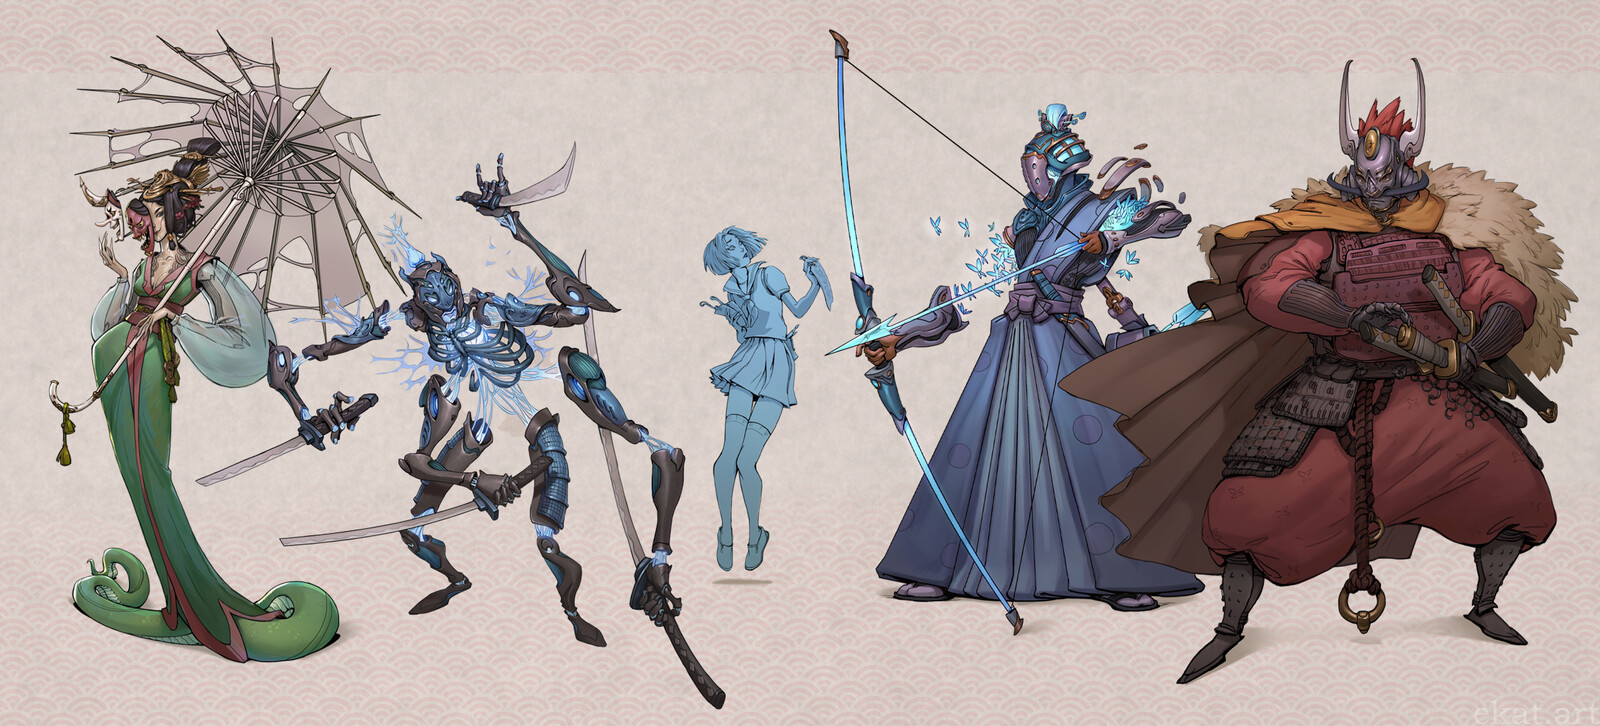 This is a set of characters for the Personal Project Nacked eye